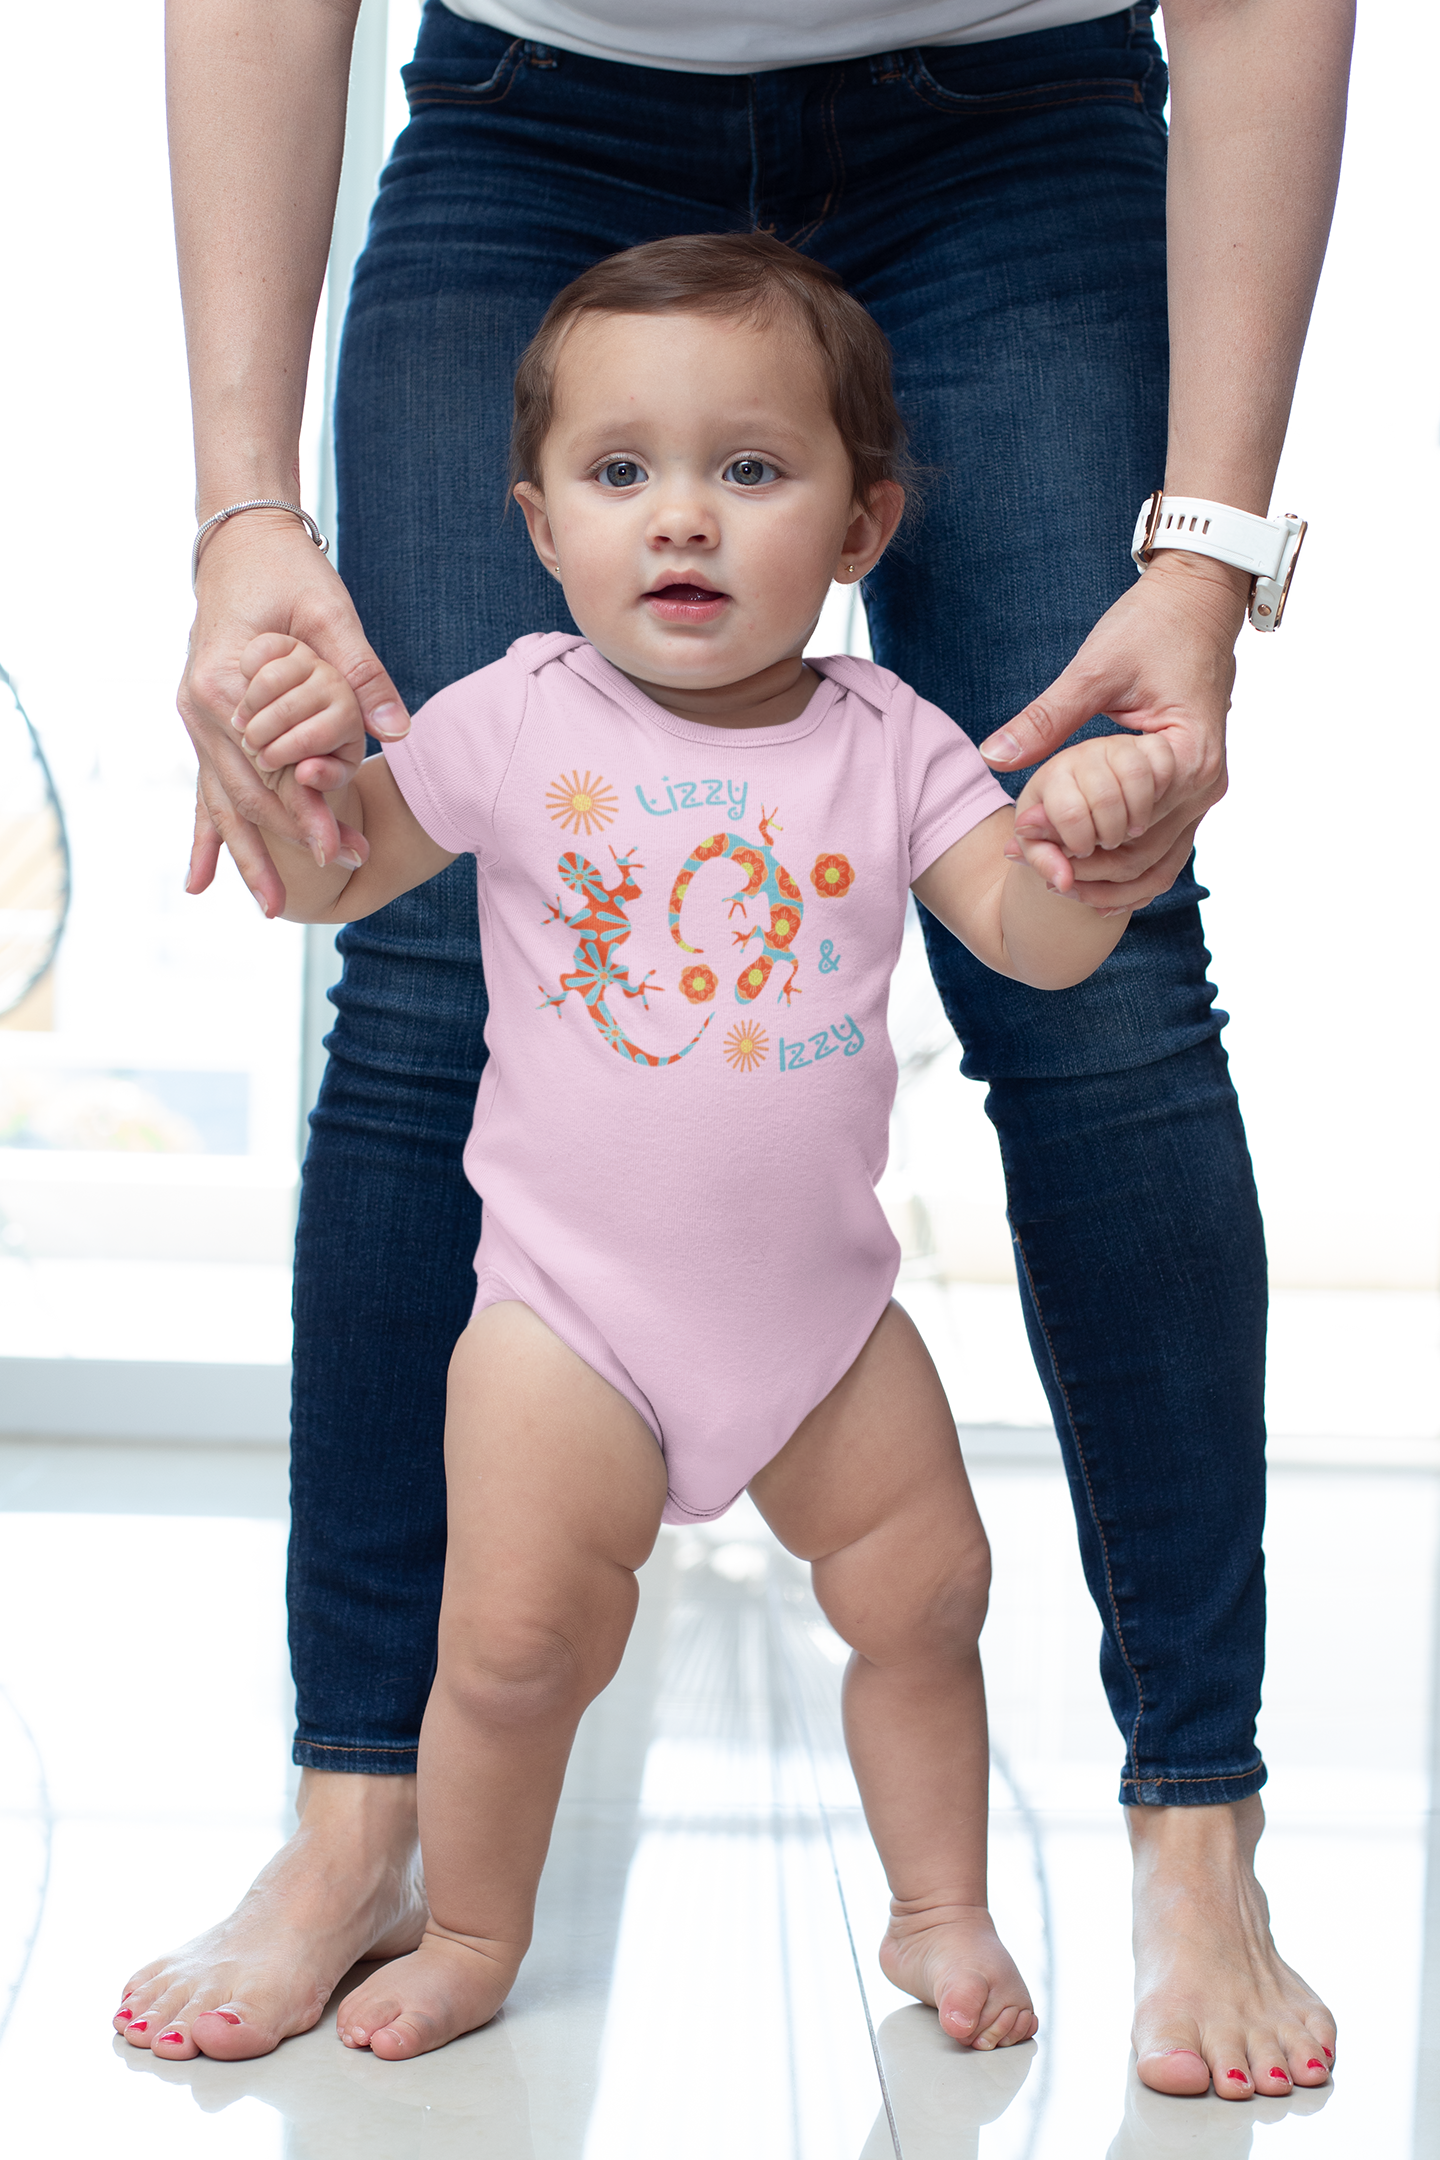 Lizzy & Izzy Onesie from Vluxe by Lucky Nahum